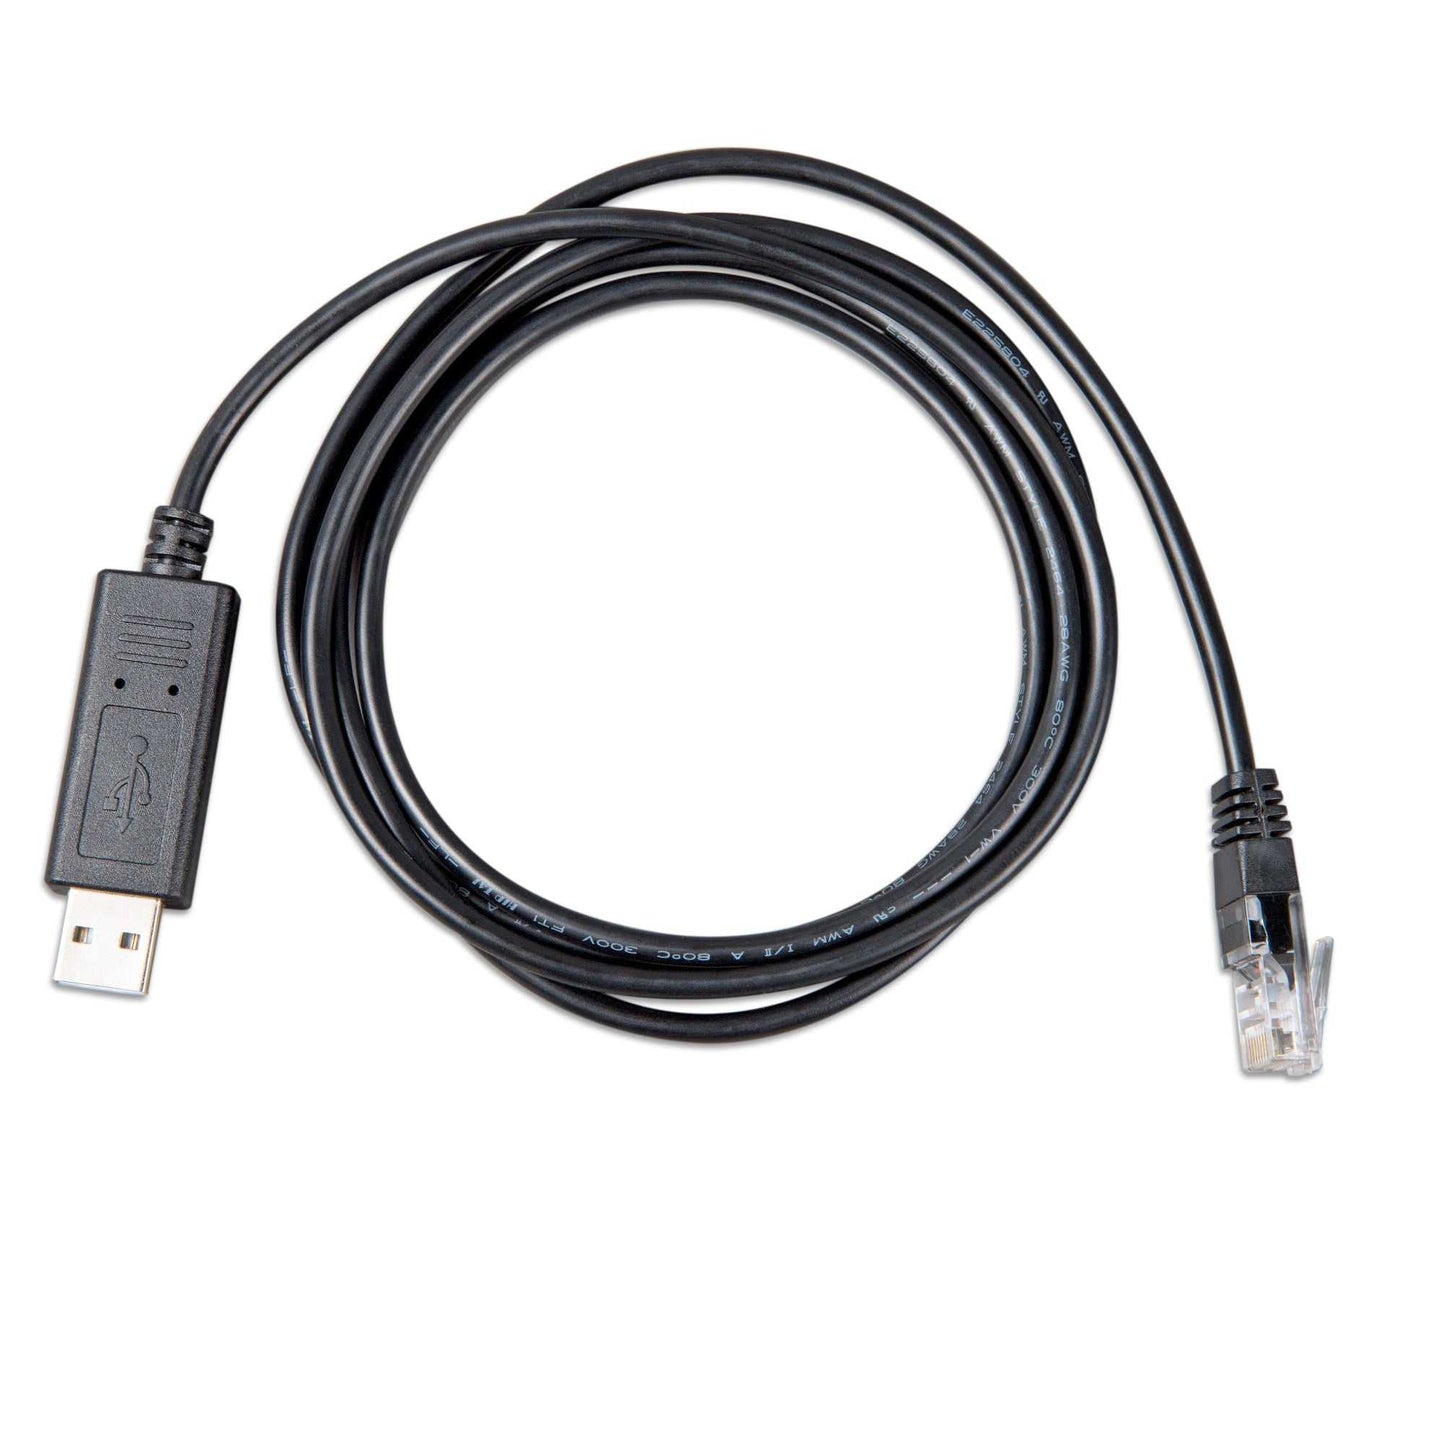 BlueSolar PWM-Pro to USB interfacecable